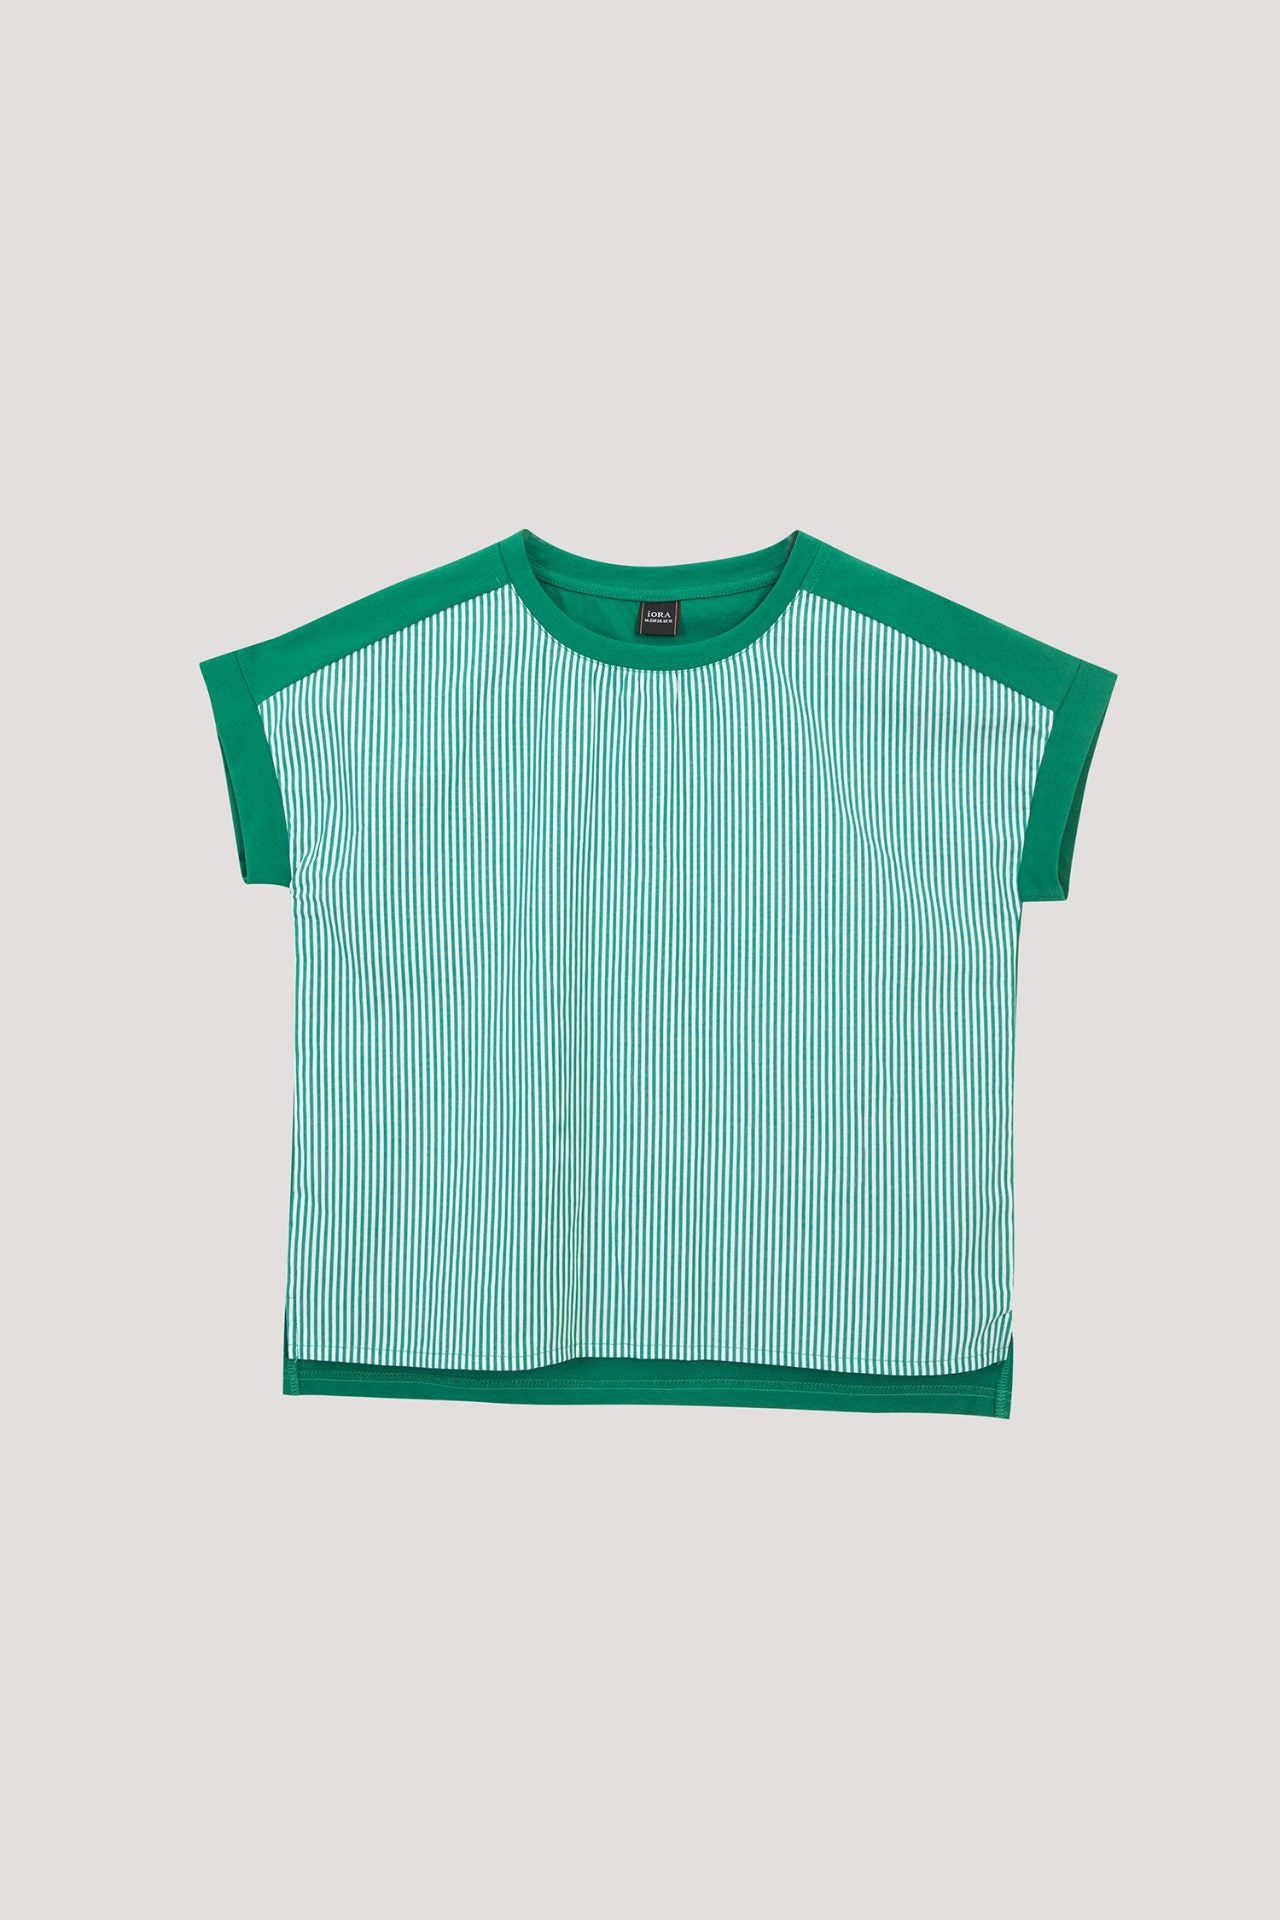 AT 9761 MIXED FABRIC STRIPED TOP GREEN